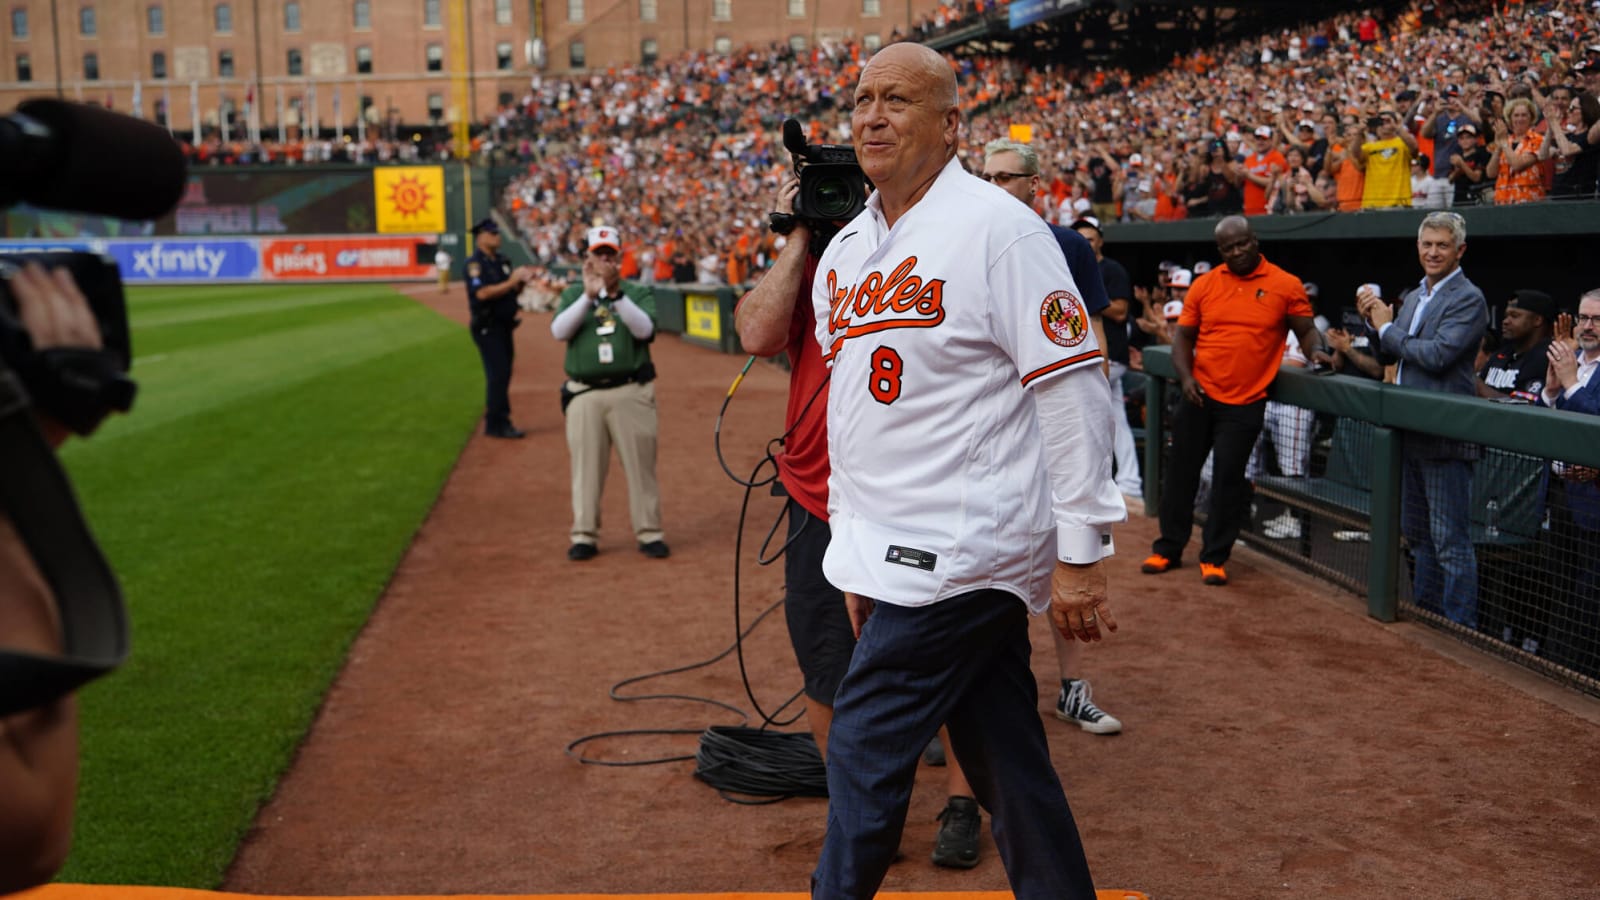 Orioles legend Cal Ripken Jr. ‘excited’ to part of team’s new ownership group